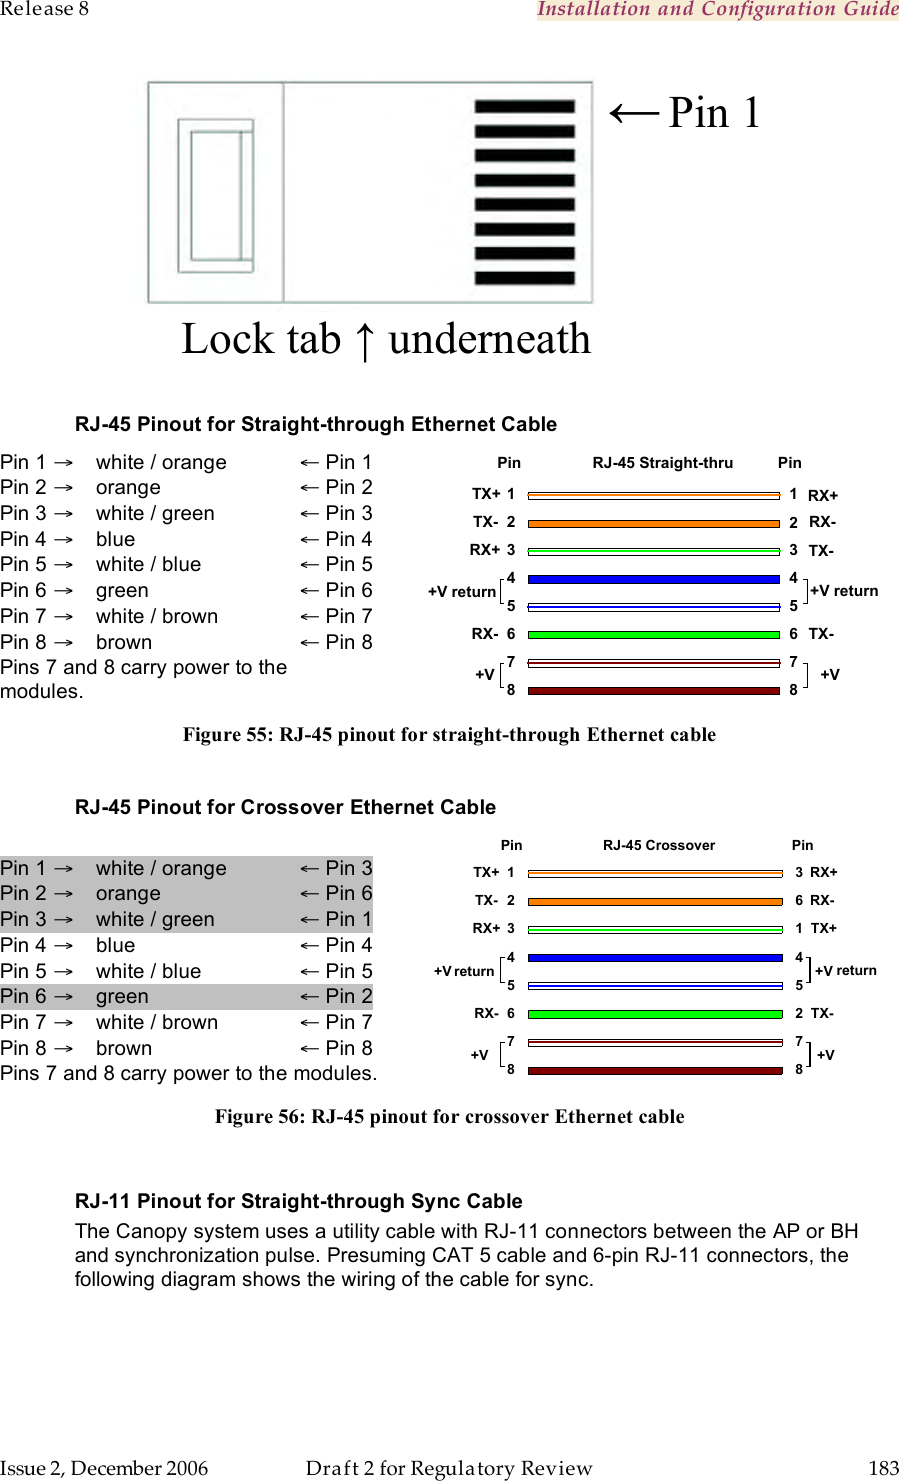 Release 8    Installation and Configuration Guide   Issue 2, December 2006  Draft 2 for Regulatory Review  183          Lock tab ↑ underneath ← Pin 1  RJ-45 Pinout for Straight-through Ethernet Cable Pin 1 →    white / orange     ← Pin 1 Pin 2 →    orange        ← Pin 2 Pin 3 →    white / green    ← Pin 3 Pin 4 →    blue      ← Pin 4 Pin 5 →    white / blue    ← Pin 5 Pin 6 →    green        ← Pin 6 Pin 7 →    white / brown   ← Pin 7 Pin 8 →    brown        ← Pin 8 Pins 7 and 8 carry power to the modules.  1234567812345678TX+TX-RX+RX-TX-TX-RX+RX-+V return+VPin PinRJ-45 Straight-thru+V return+V Figure 55: RJ-45 pinout for straight-through Ethernet cable  RJ-45 Pinout for Crossover Ethernet Cable  Pin 1 →    white / orange      ← Pin 3 Pin 2 →    orange        ← Pin 6 Pin 3 →    white / green    ← Pin 1 Pin 4 →    blue      ← Pin 4 Pin 5 →    white / blue    ← Pin 5 Pin 6 →    green        ← Pin 2 Pin 7 →    white / brown   ← Pin 7 Pin 8 →    brown        ← Pin 8 Pins 7 and 8 carry power to the modules.  78TX+TX-RX+RX-36145278RX+RX-TX+TX-123456+Vreturn+V +V+VreturnPin PinRJ-45 Crossover Figure 56: RJ-45 pinout for crossover Ethernet cable  RJ-11 Pinout for Straight-through Sync Cable The Canopy system uses a utility cable with RJ-11 connectors between the AP or BH and synchronization pulse. Presuming CAT 5 cable and 6-pin RJ-11 connectors, the following diagram shows the wiring of the cable for sync. 